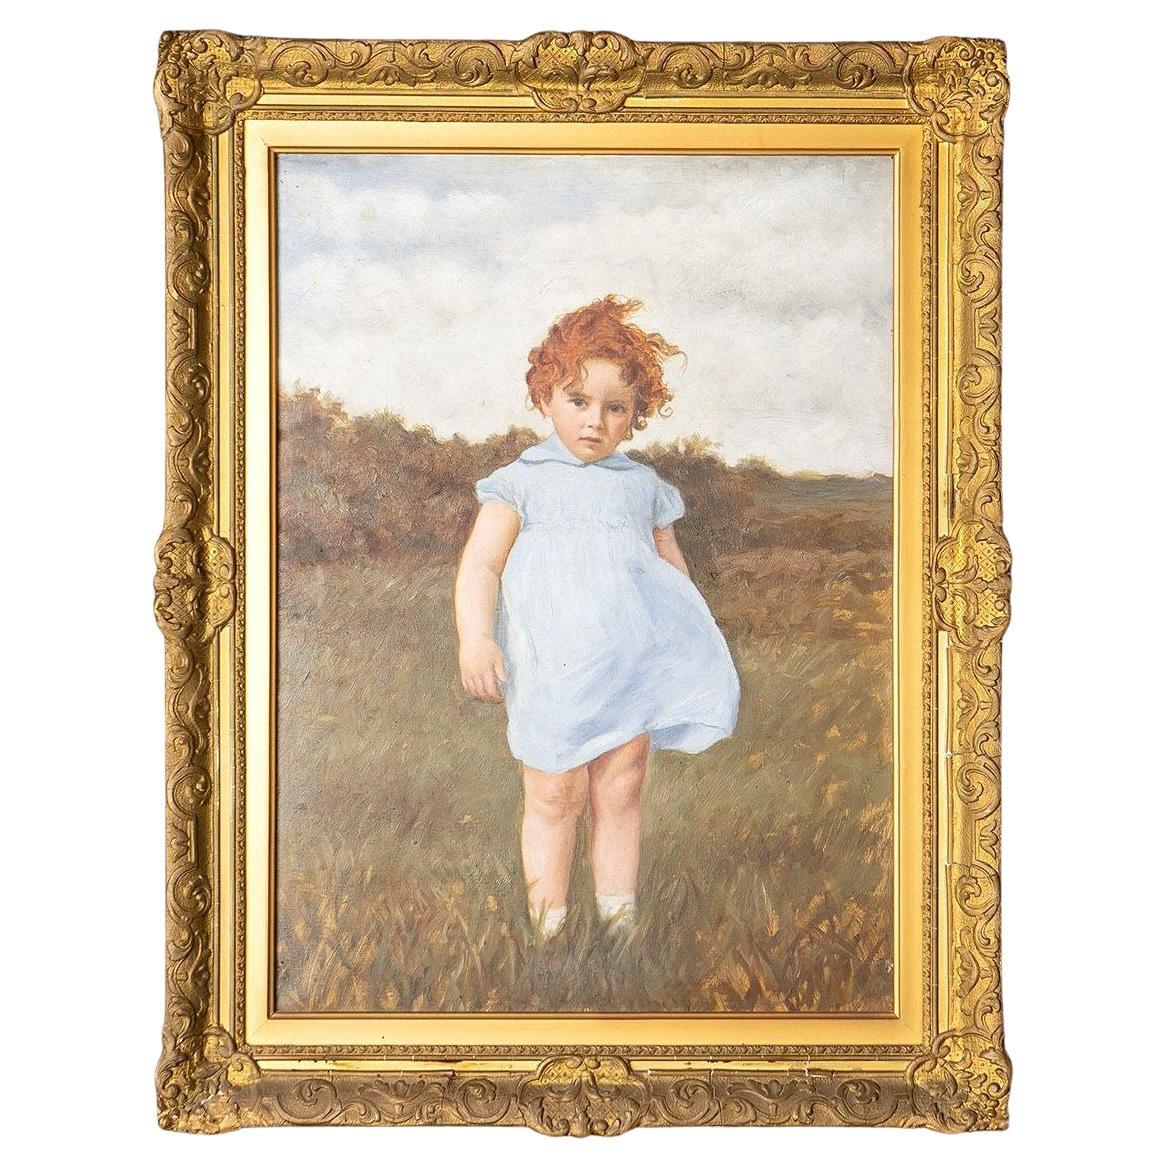 Antique Portrait of a Young Girl, Oil on Canvas, Early 20th Century